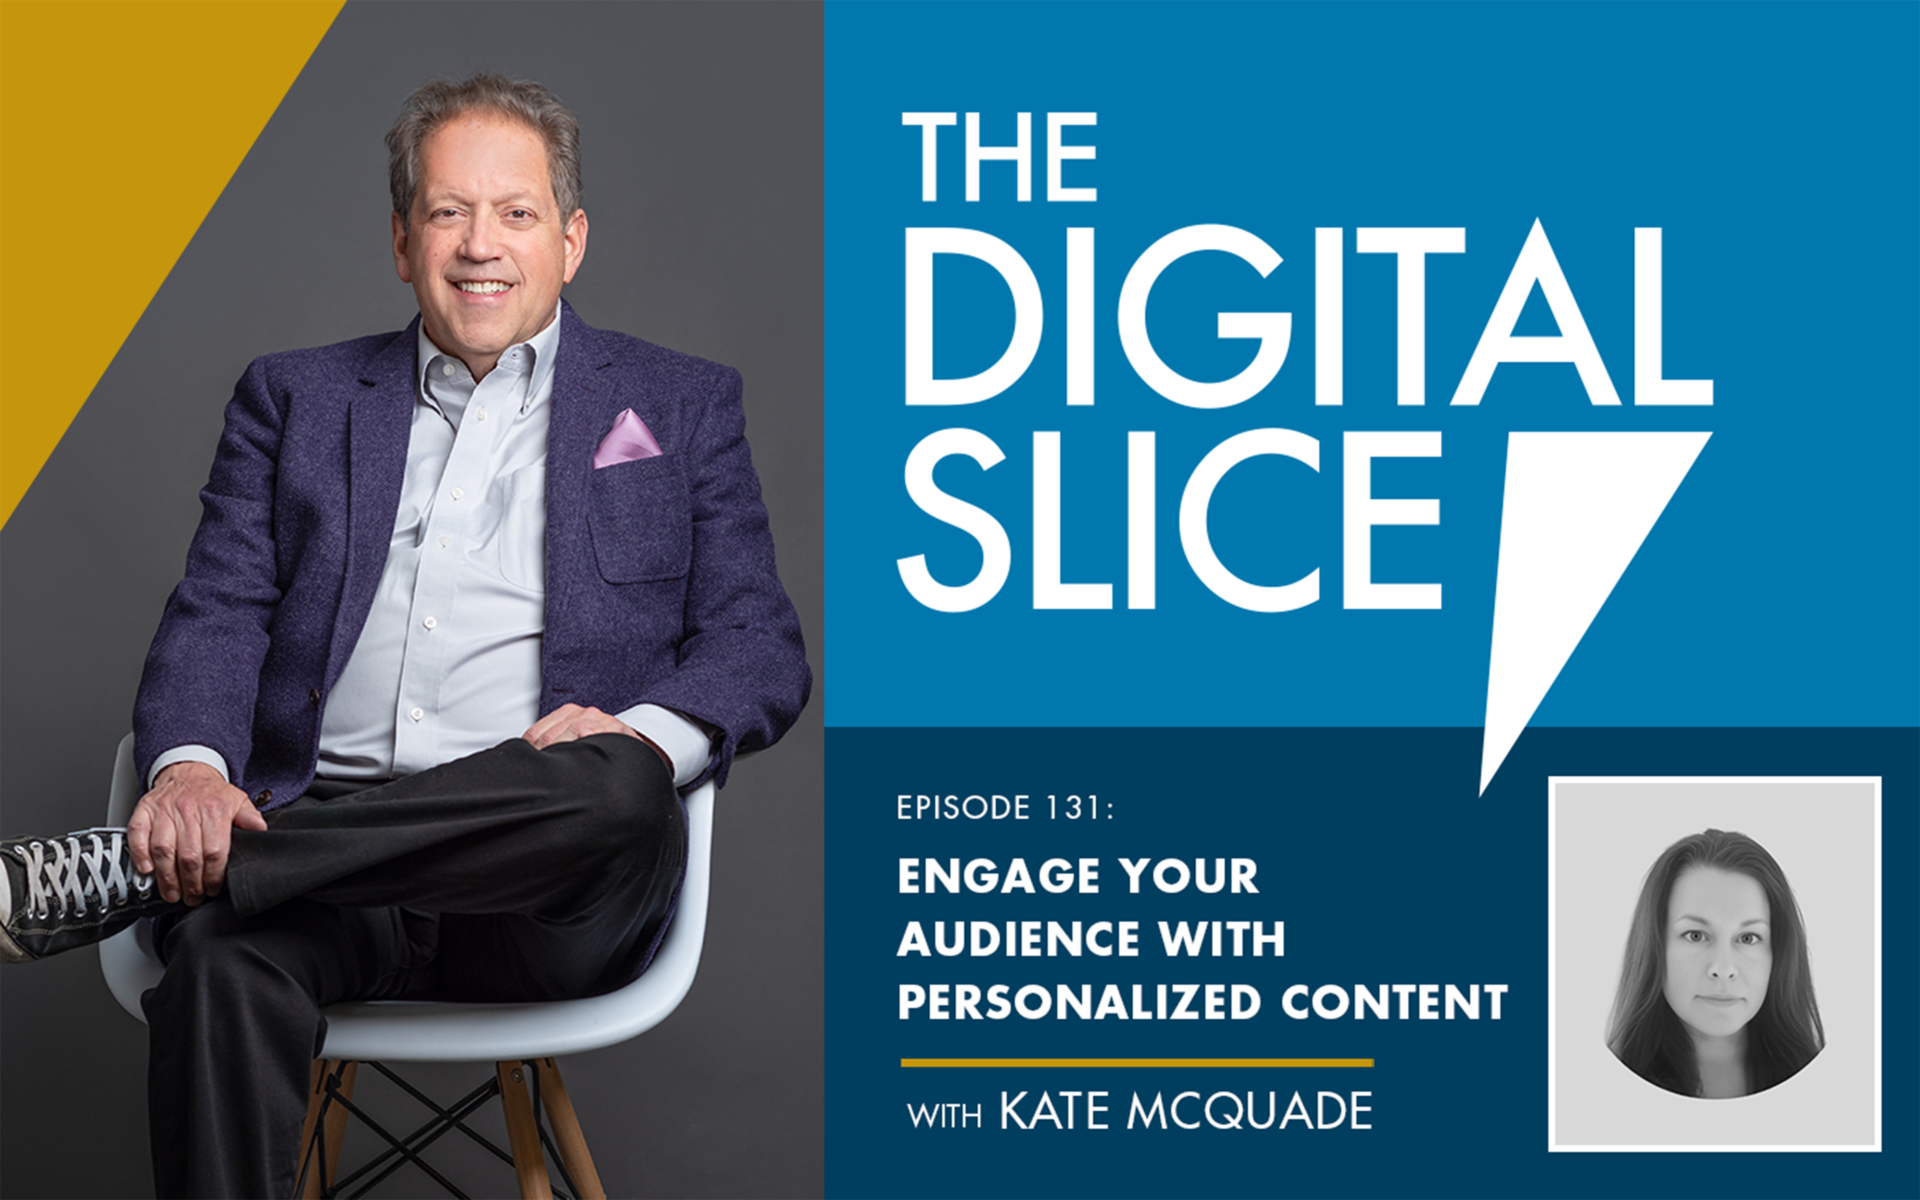 [PODCAST] Engage Your Audience With Personalized Content